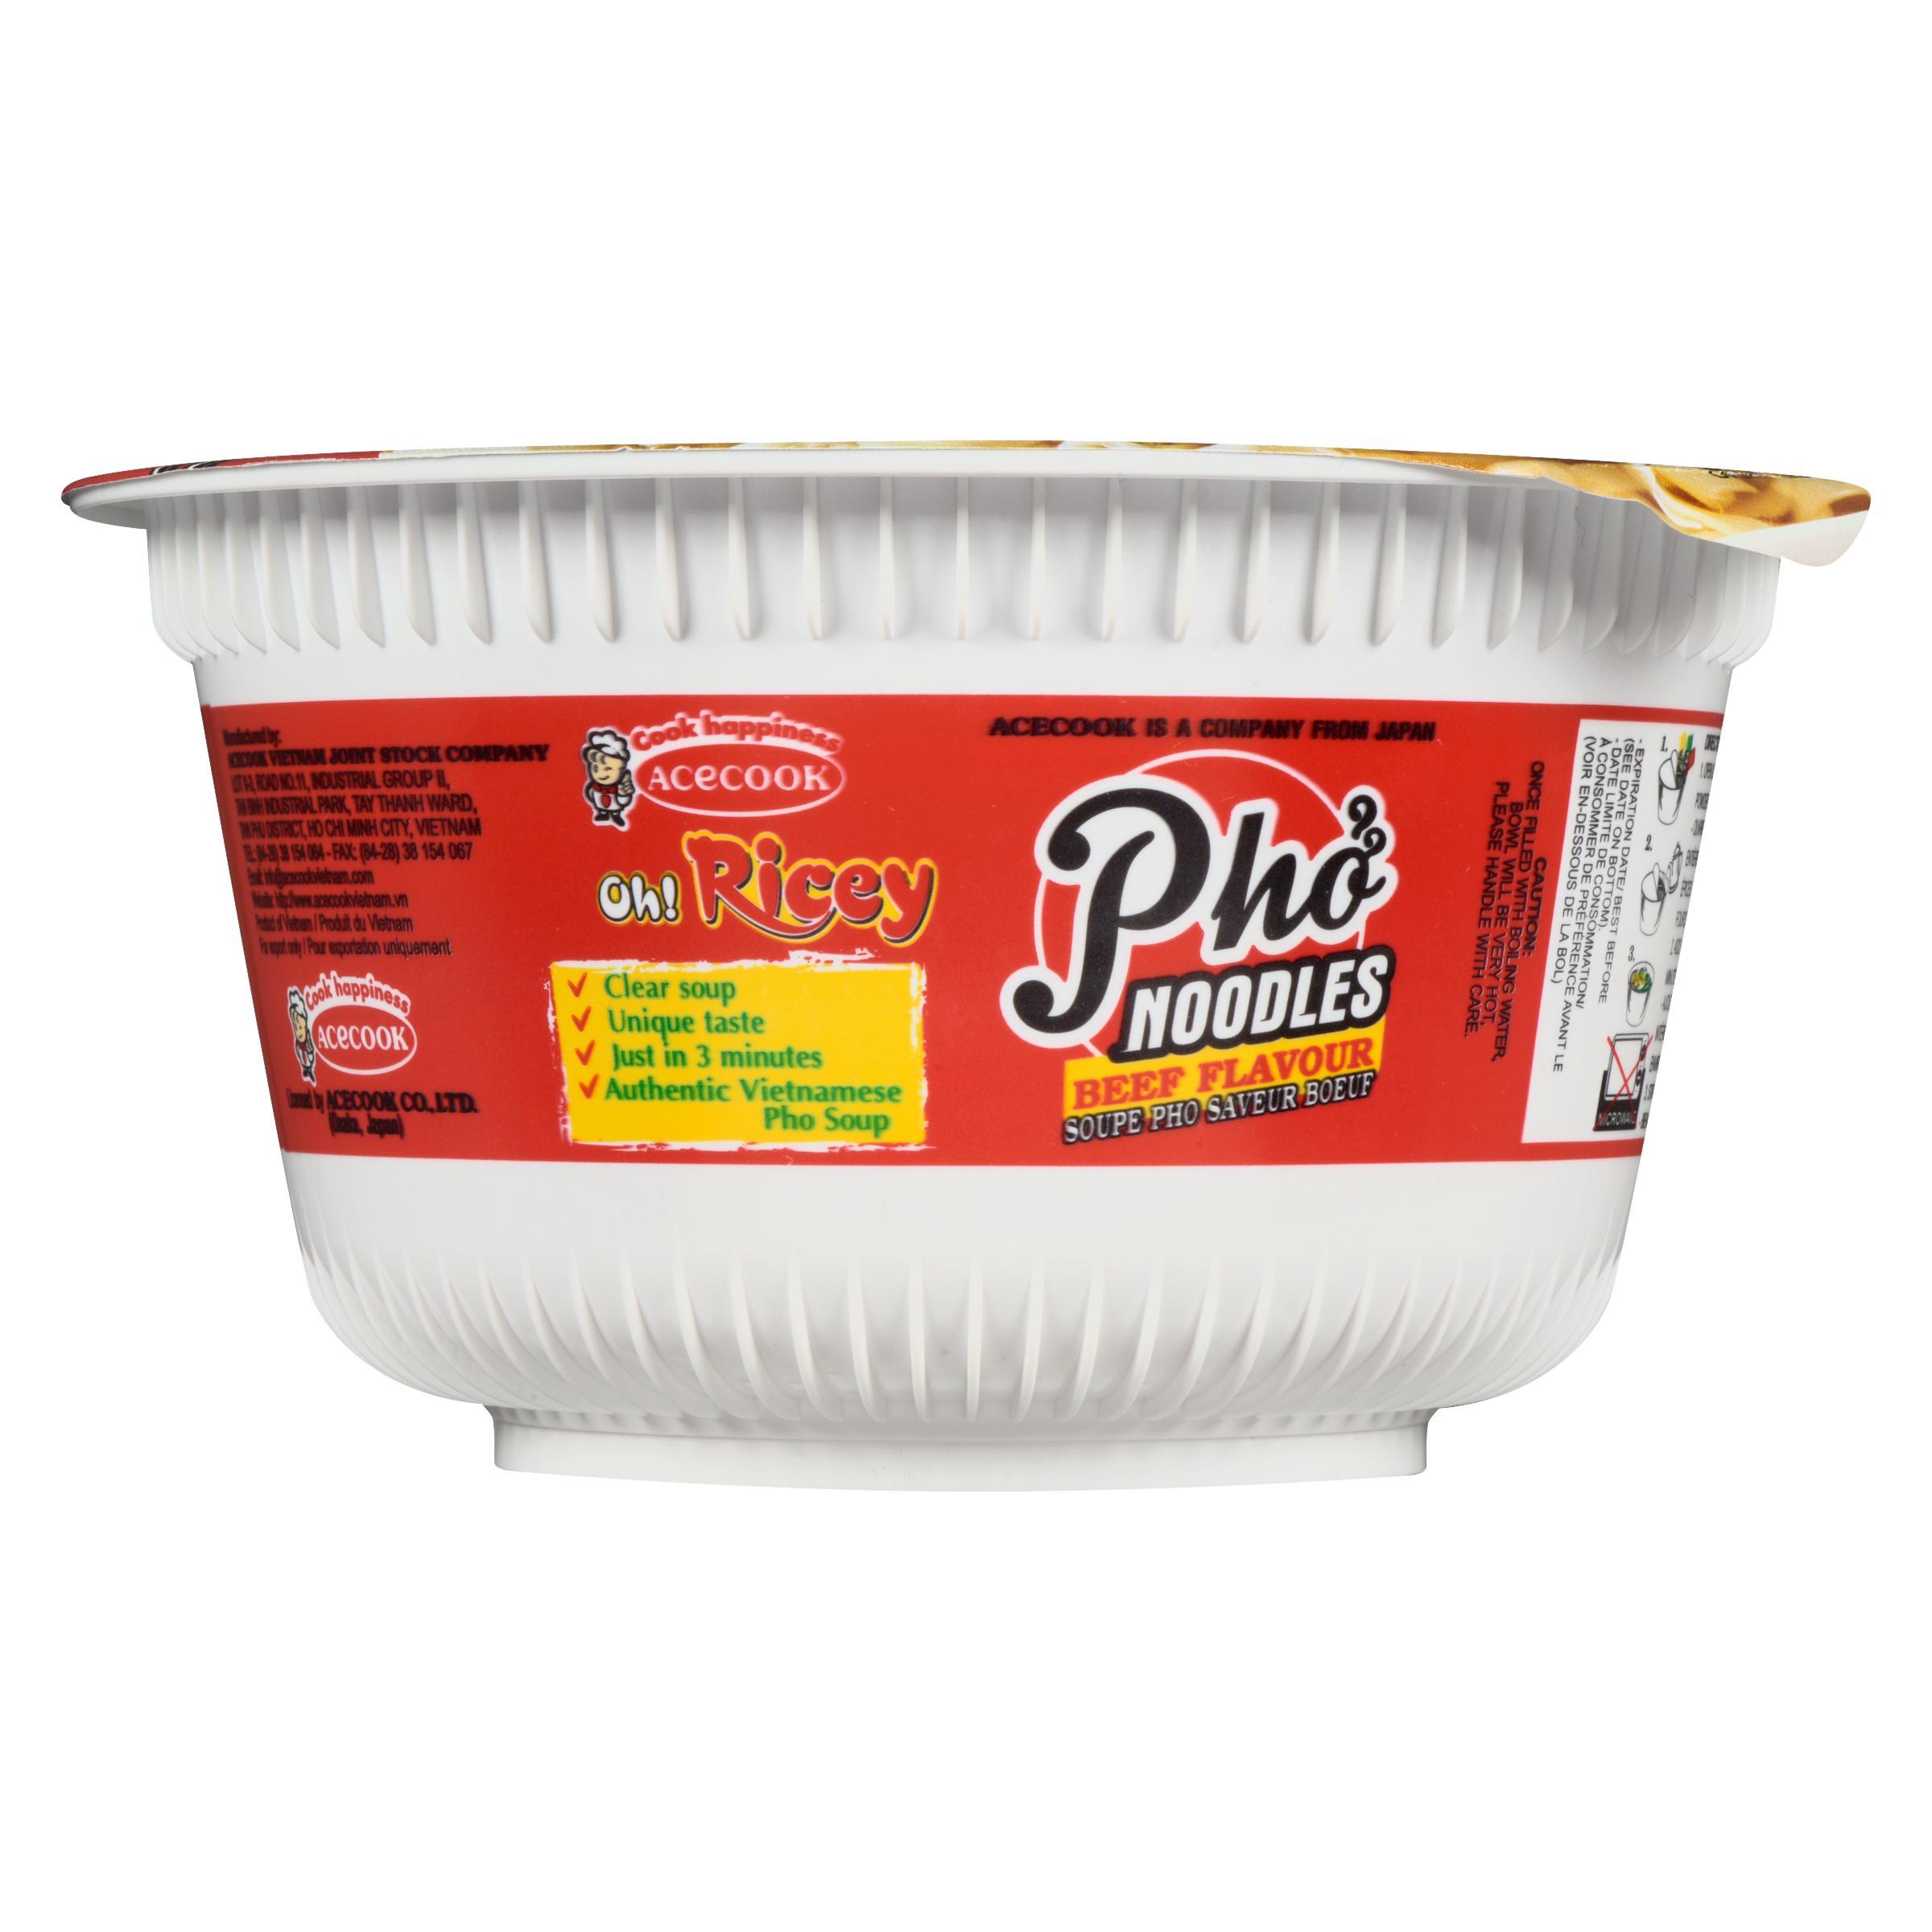 Oh! Ricey Beef Flavour Rice Noodle Bowl, 70 g bowl